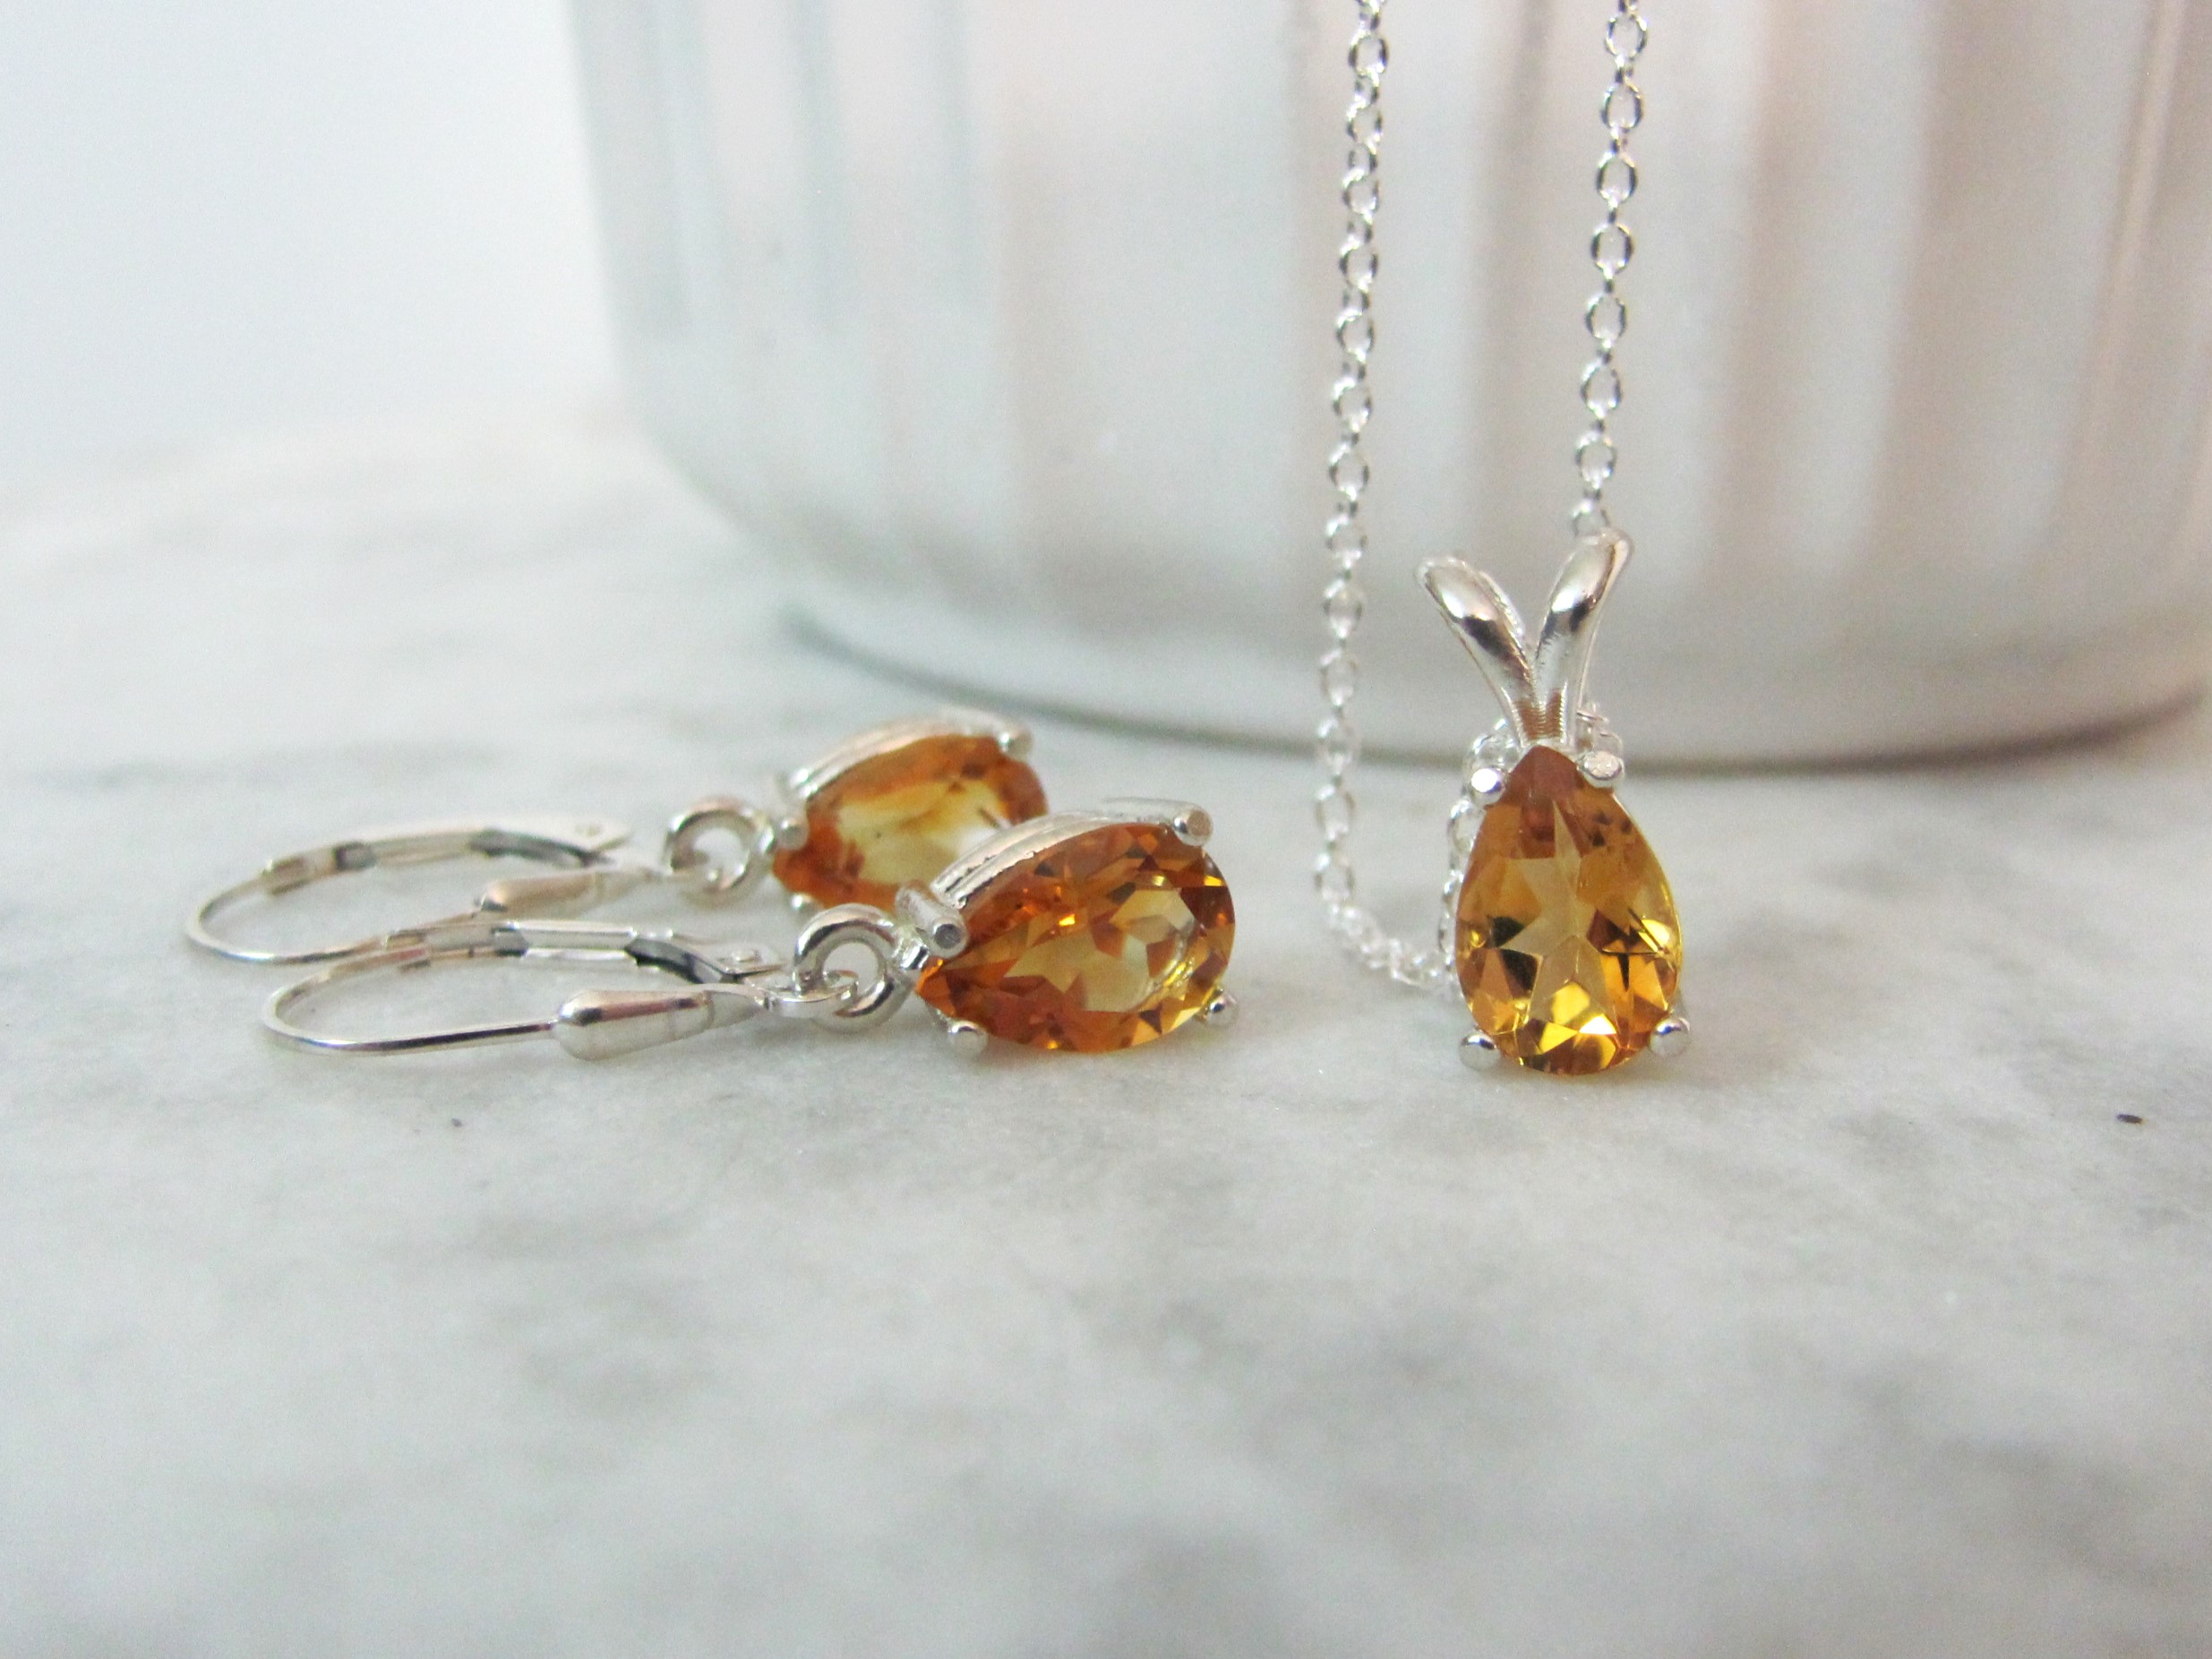 Citrine Pear Necklace and Earring Set in Sterling Silver